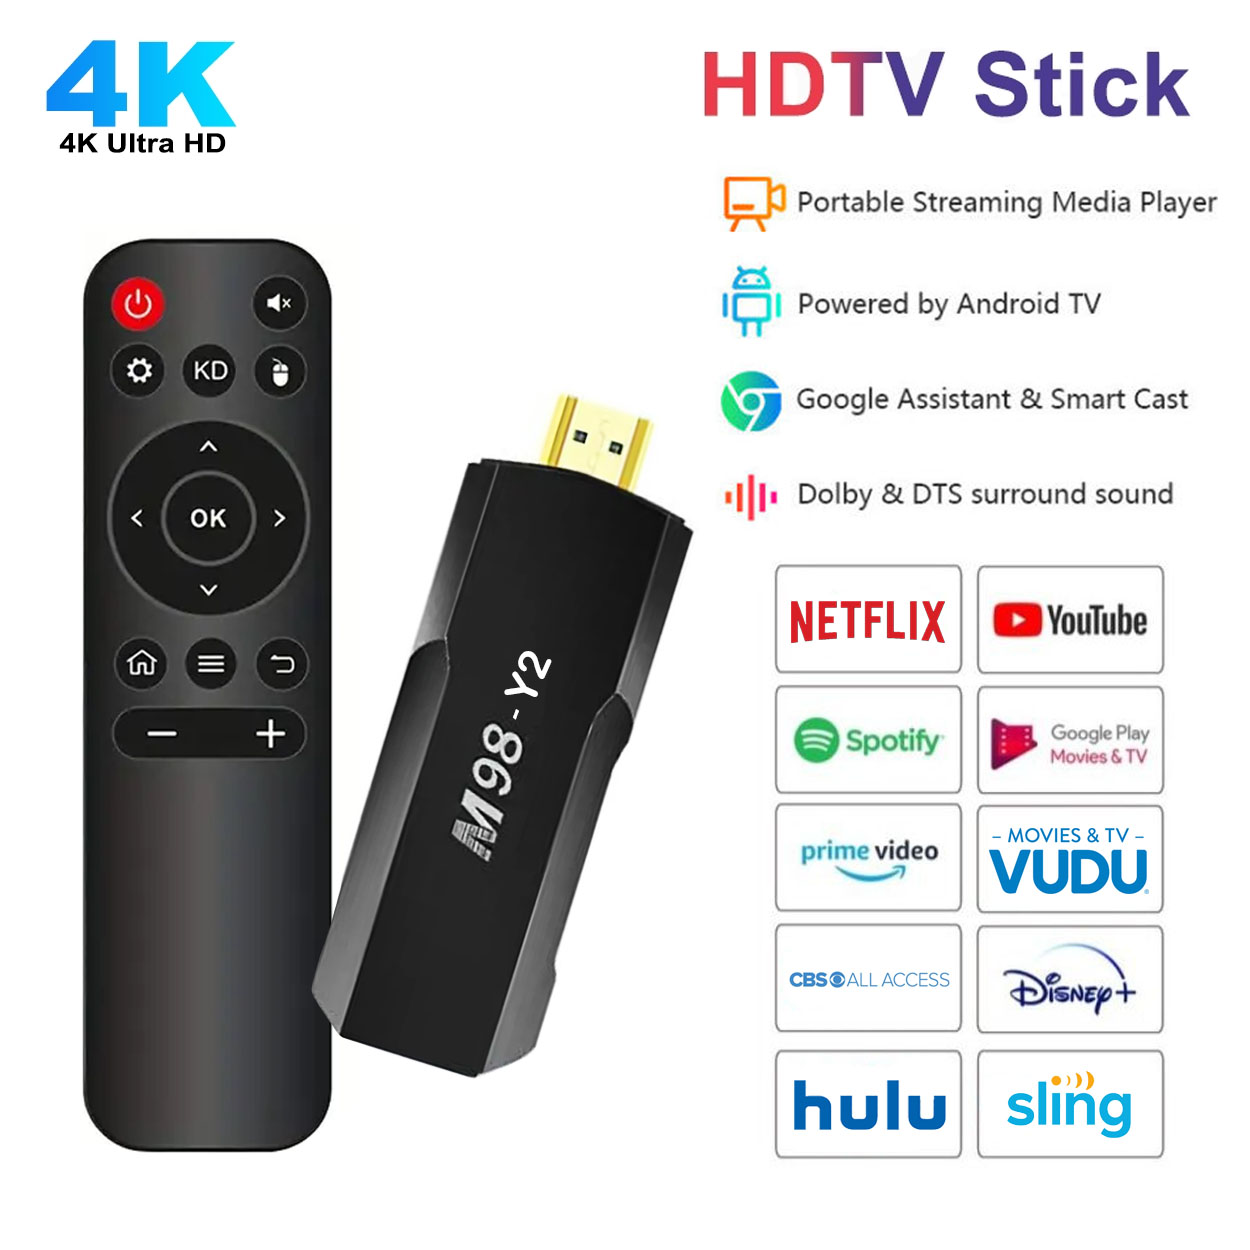 TV BOX with remote control 4K QUALITY USB 2.0 HDMI DVB-T2 FULL HD ANDROID  BOX CPU 4 cores 64 BIT INTERNET TV 2.46 GHz